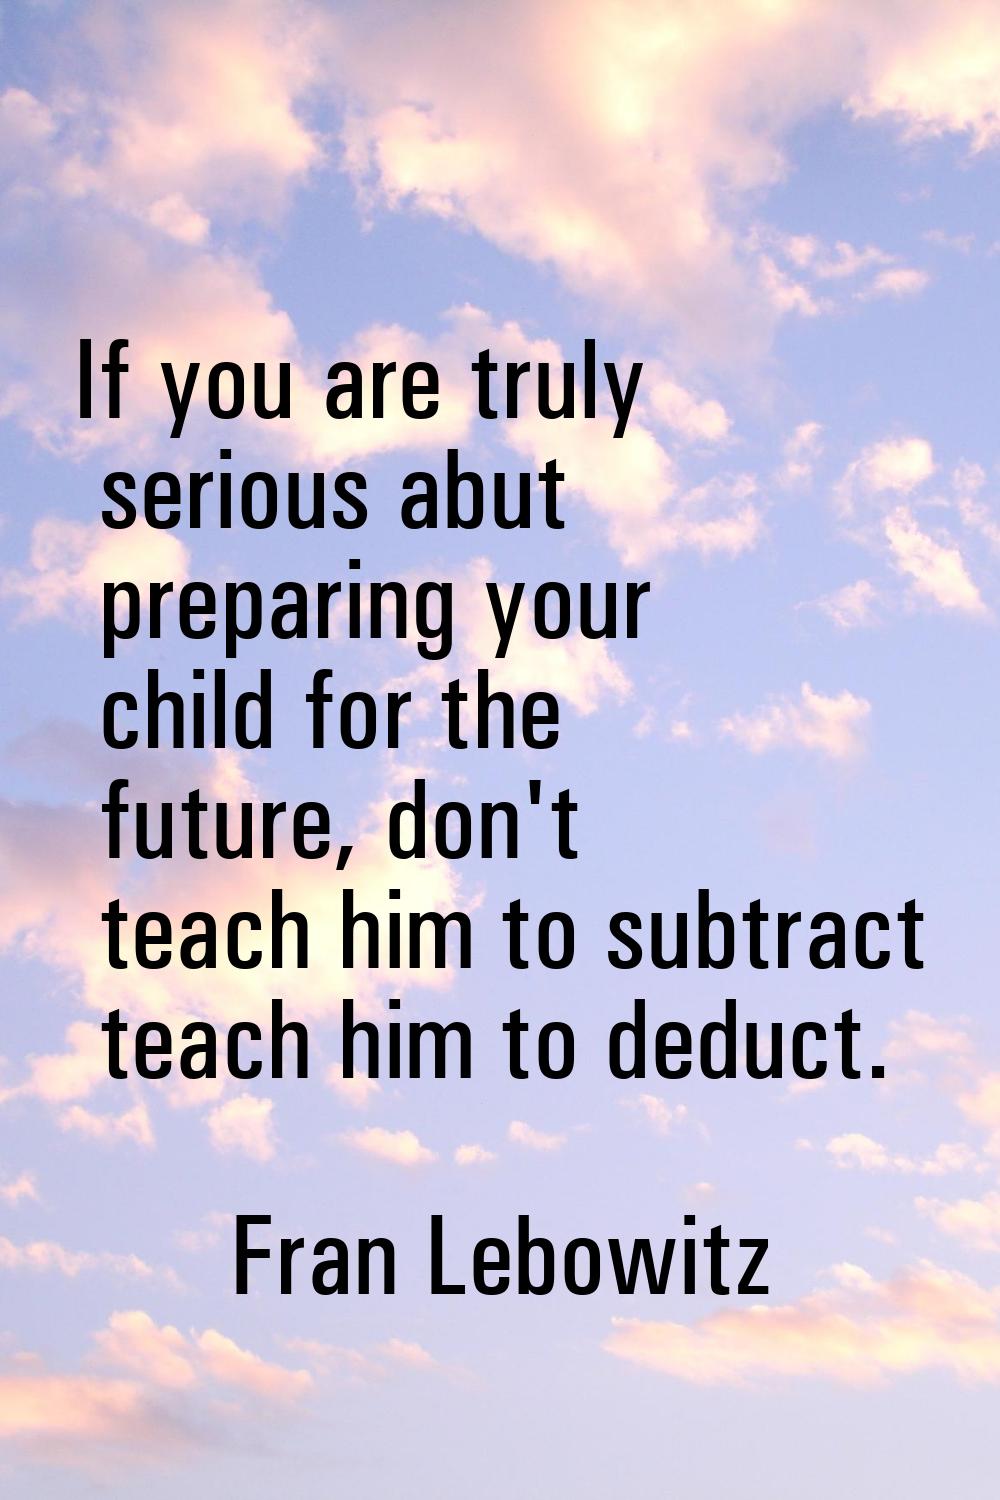 If you are truly serious abut preparing your child for the future, don't teach him to subtract teac